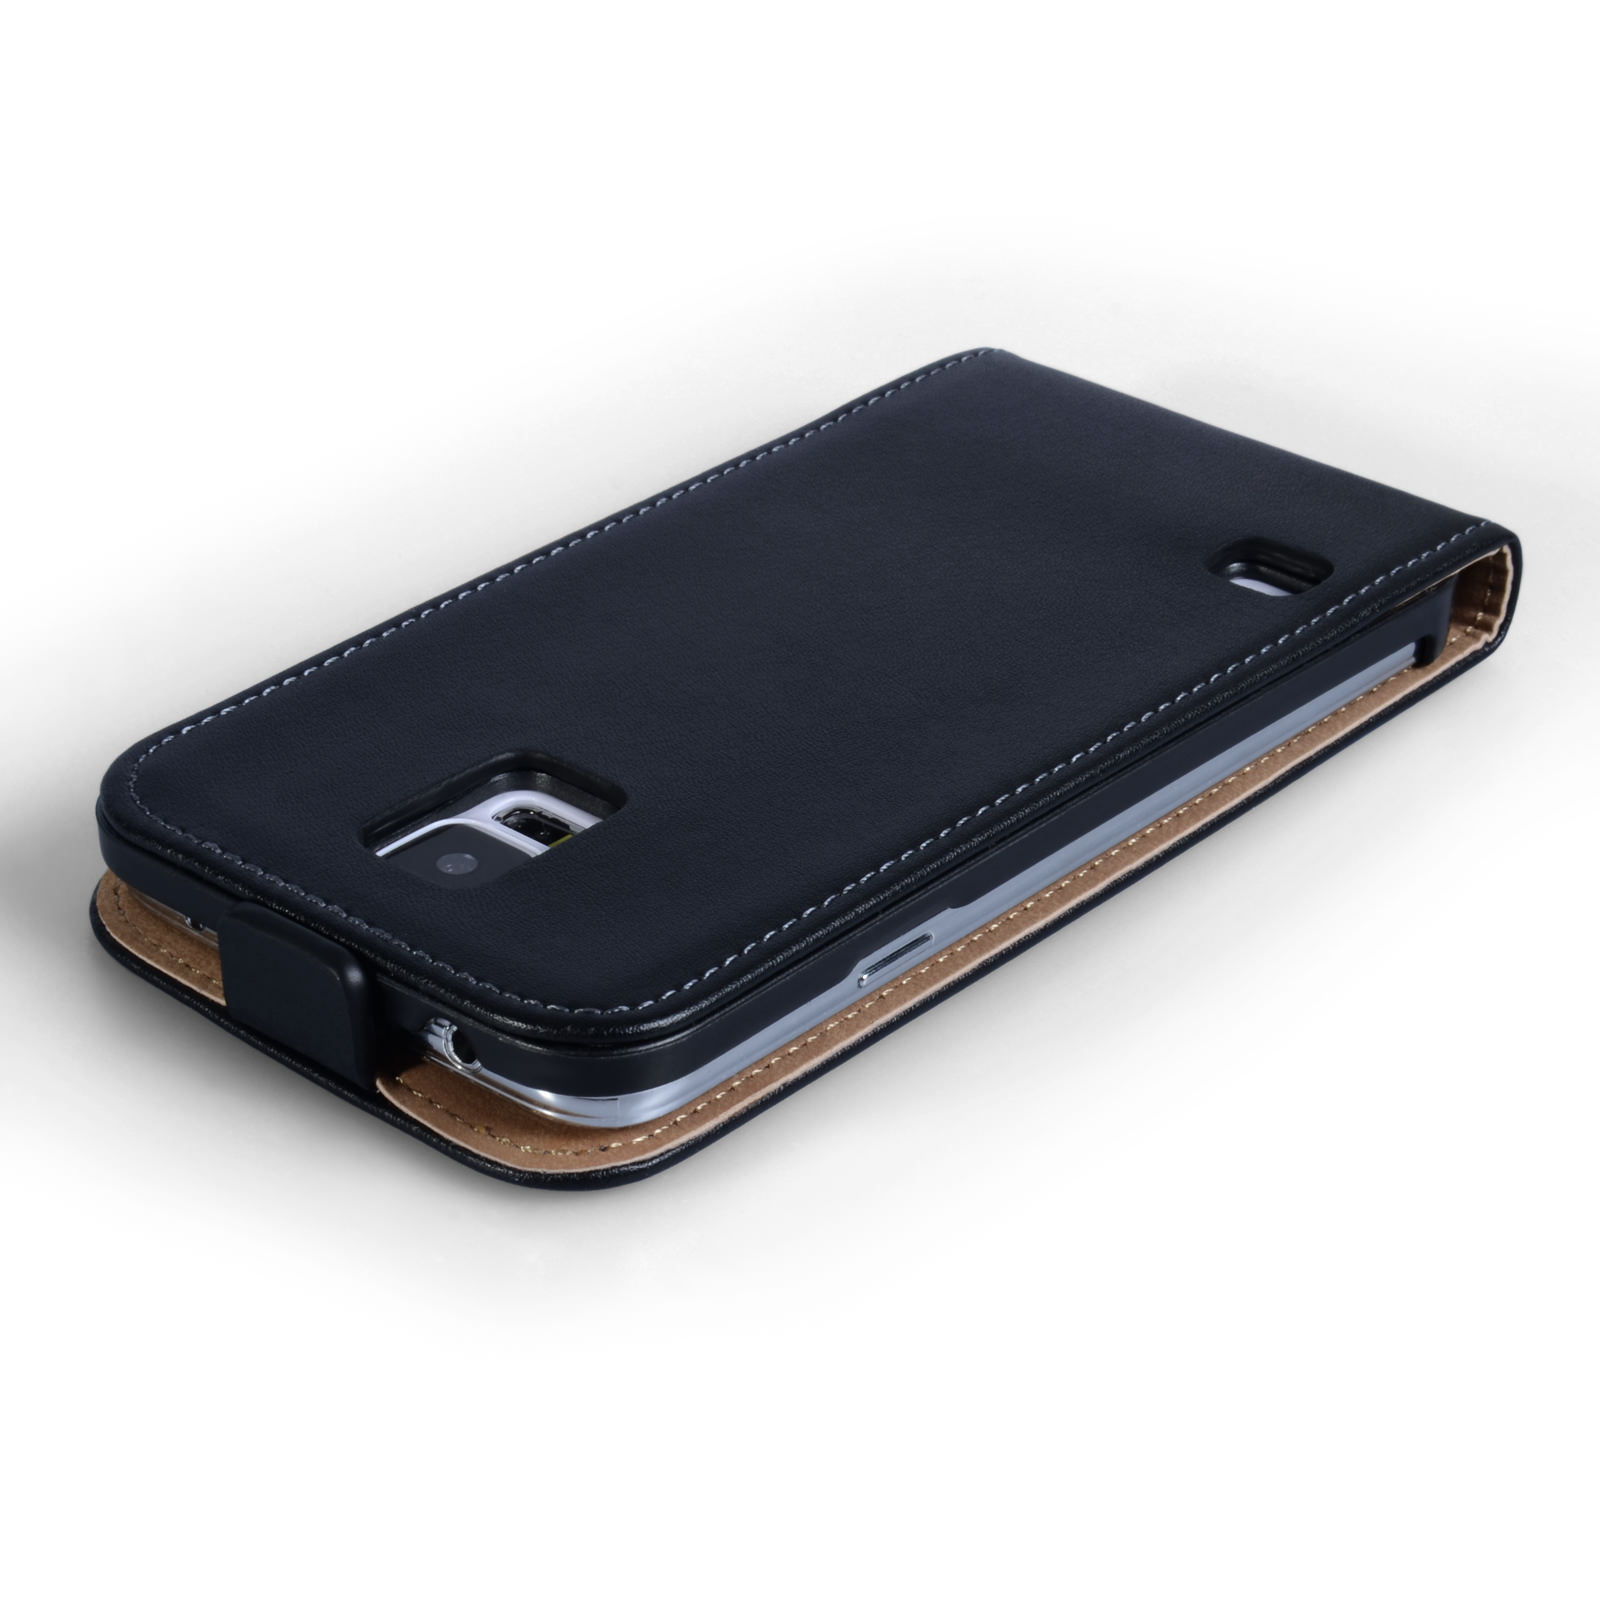 Caseflex Galaxy S5 Leather Flip Case in Black Stylus And Car Charger